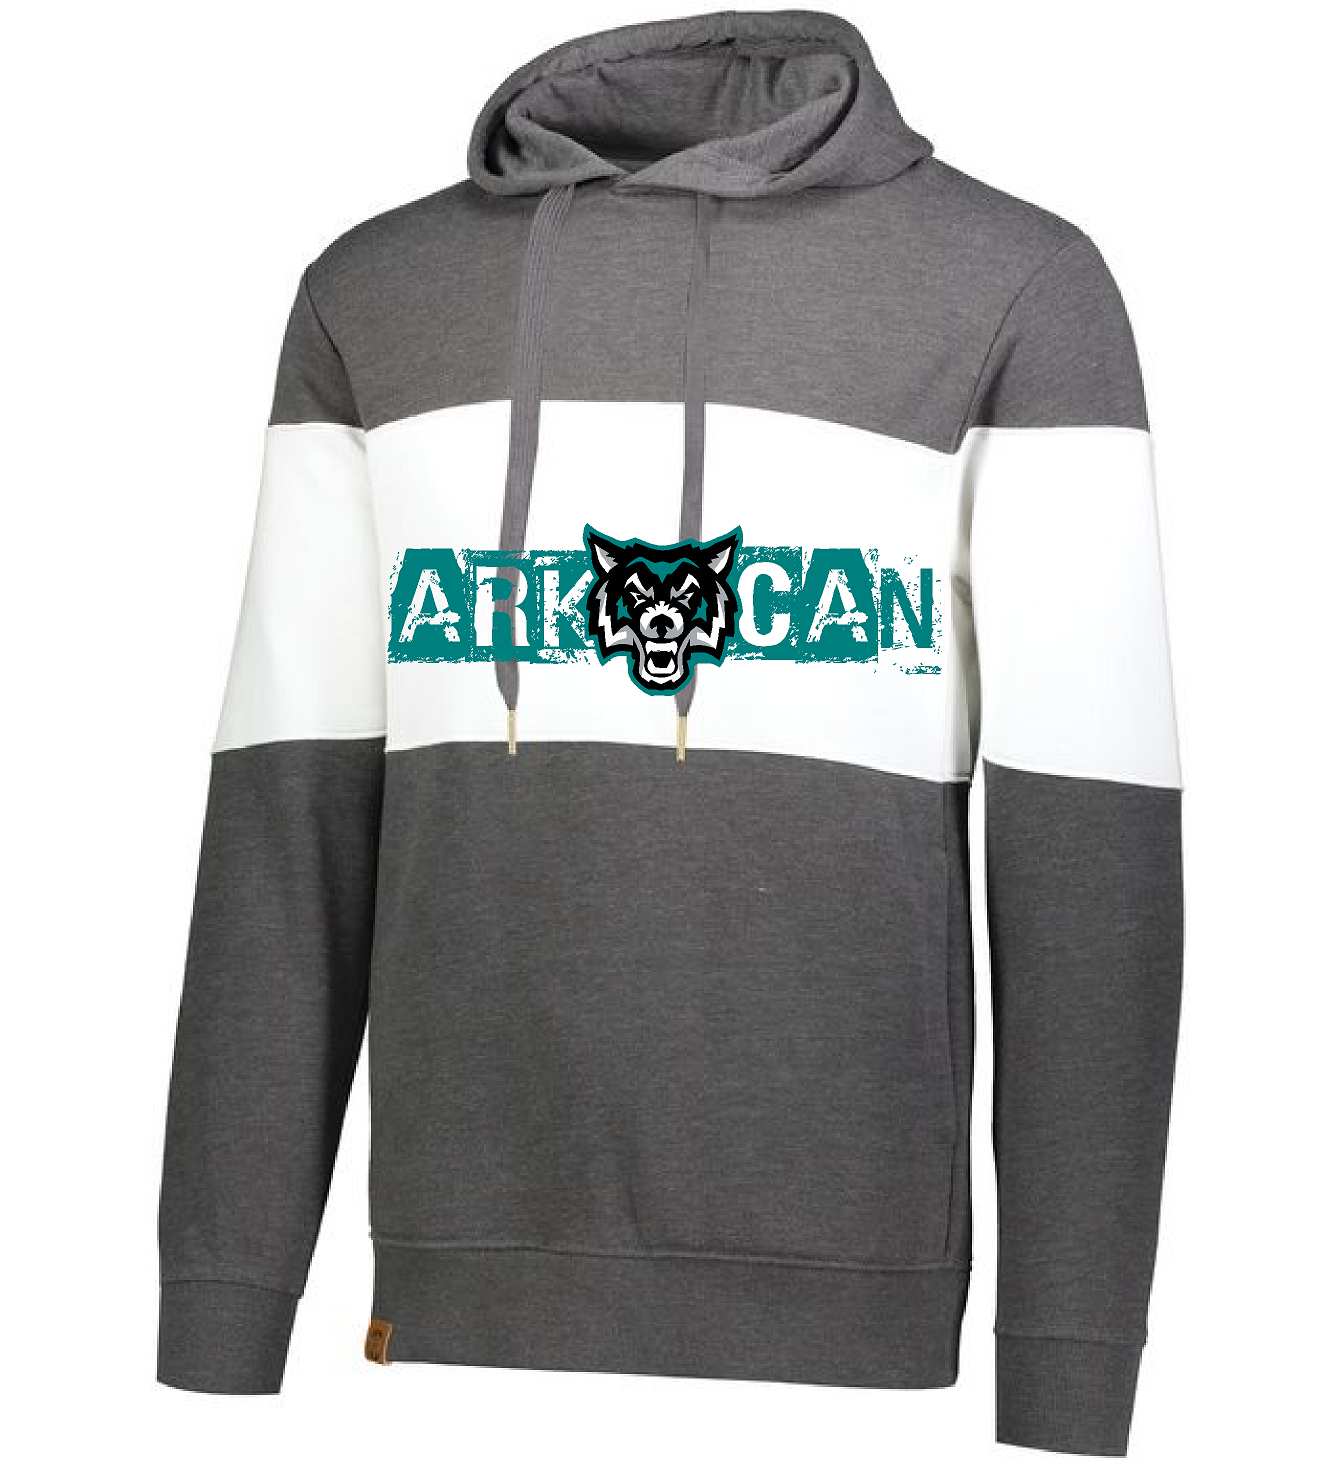 Ark-Can Wolves Holloway Ivy League Hoodie 229563 Unisex